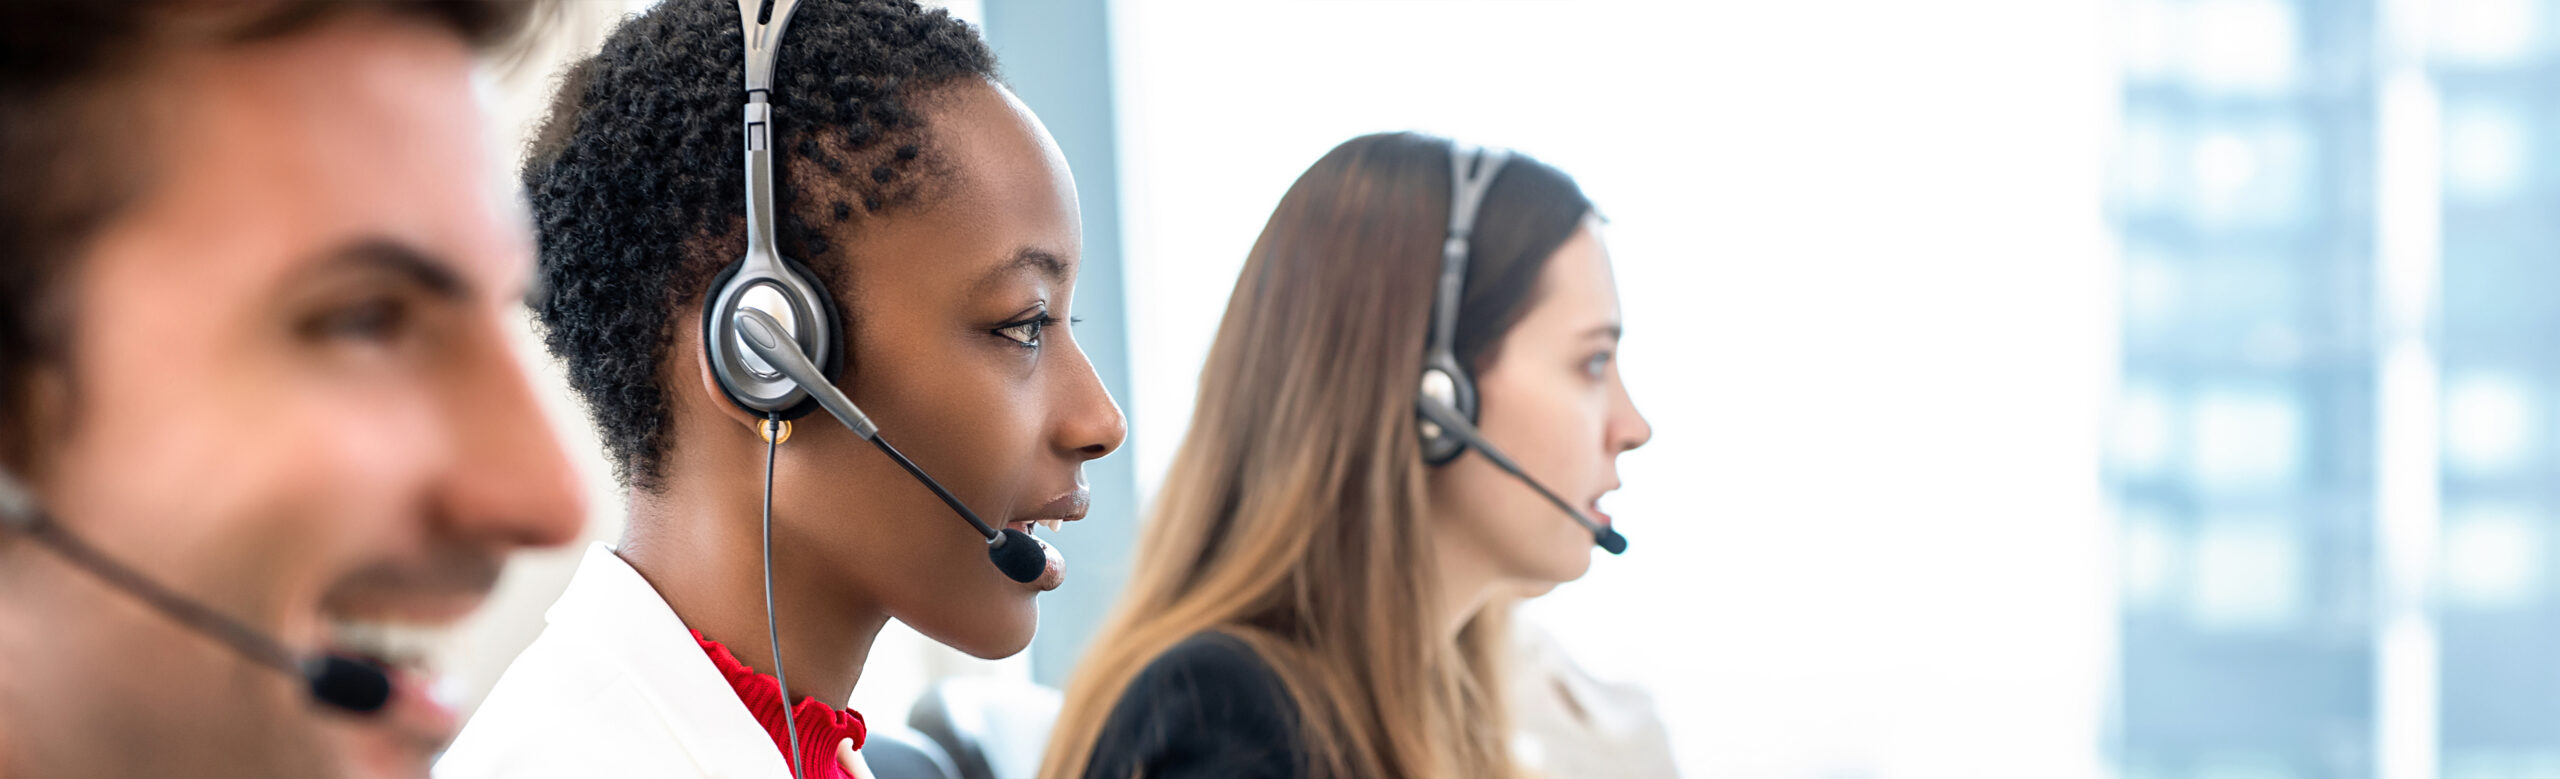 Contact centres agents on their headsets - close-up shot